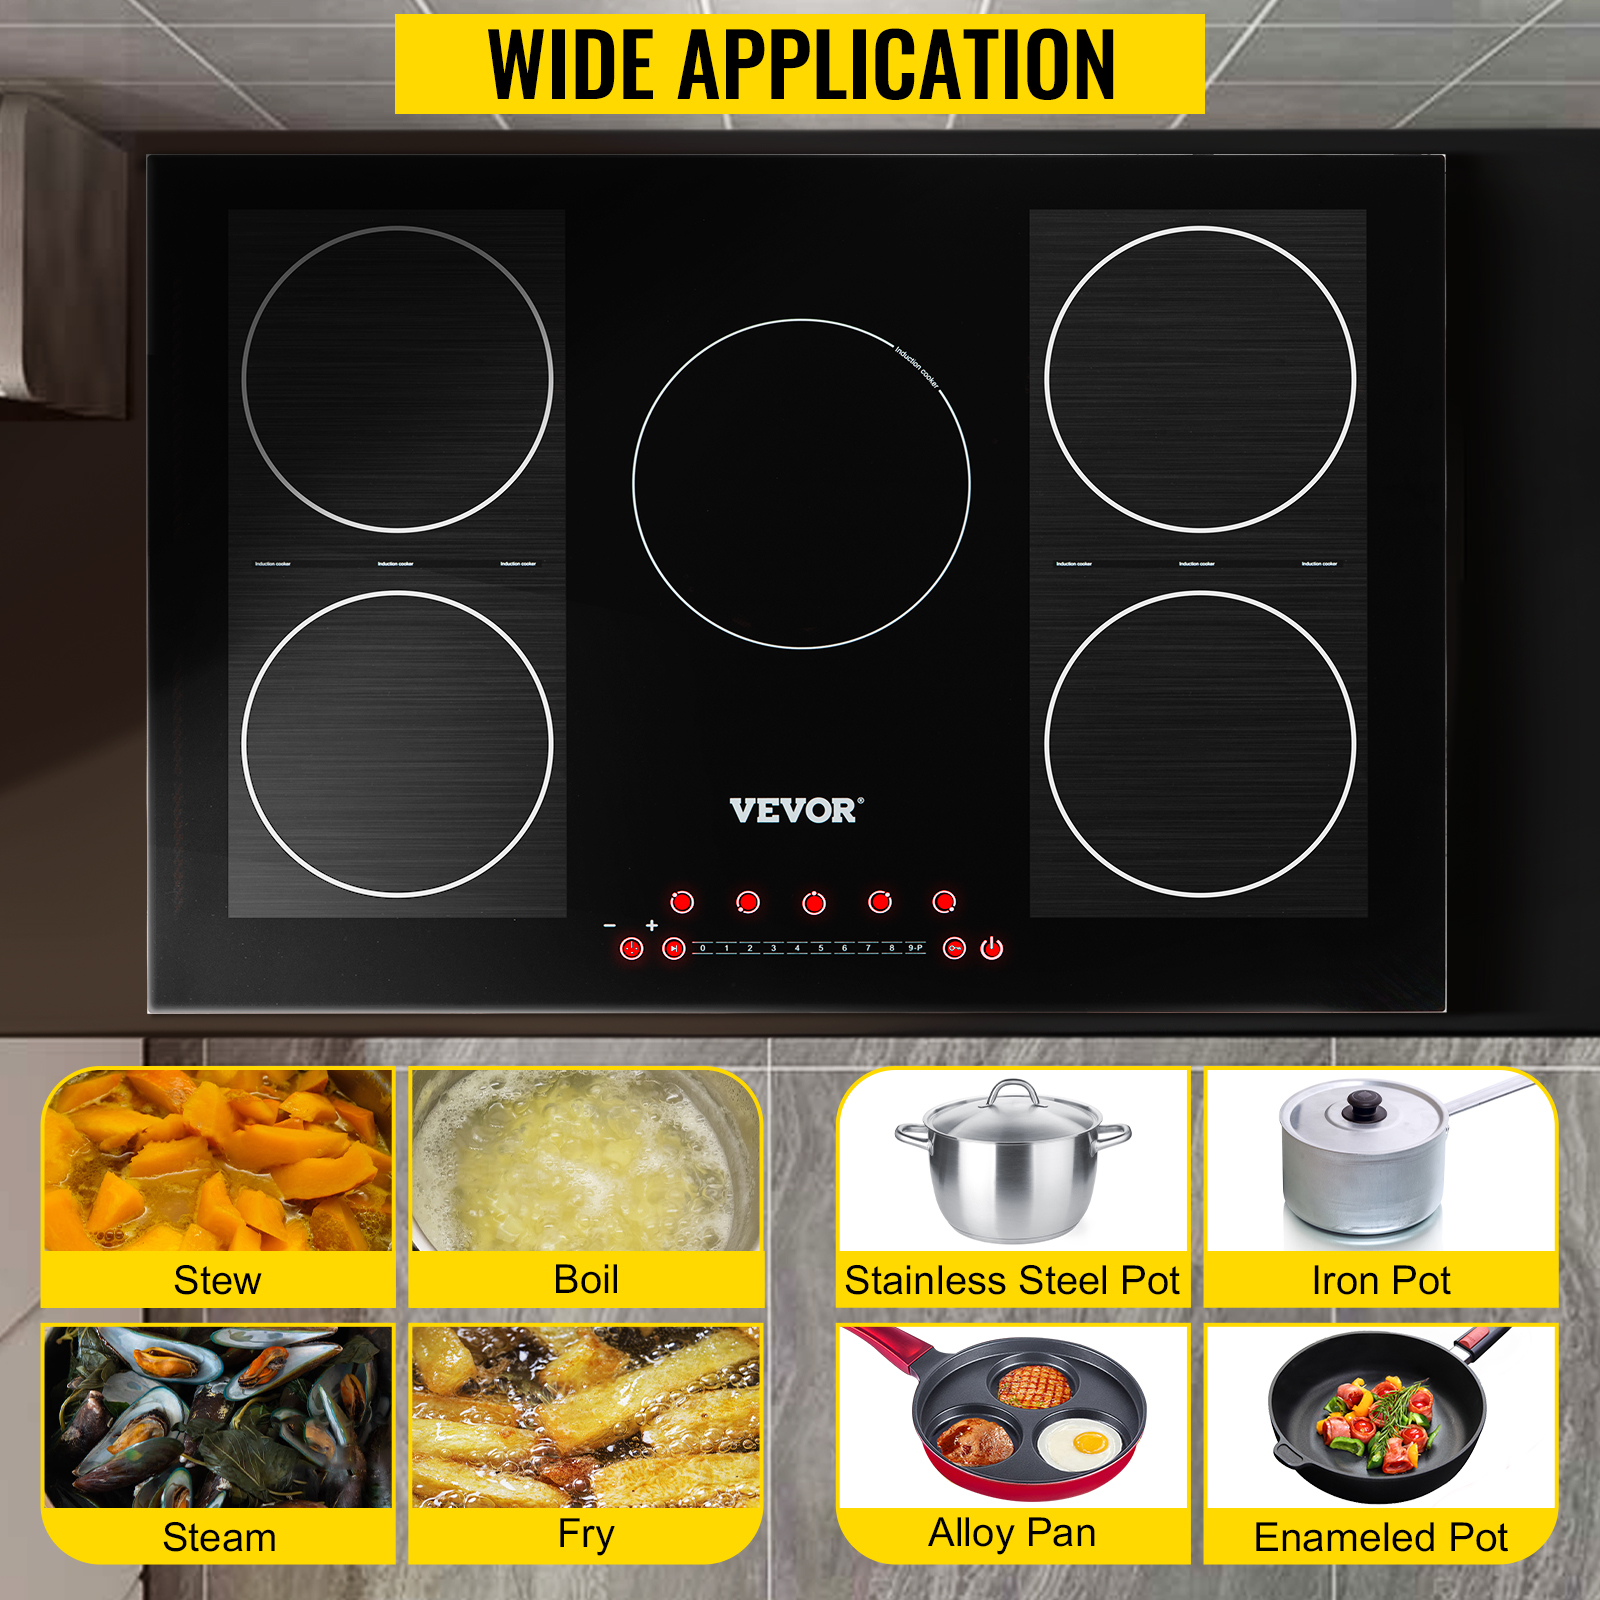 VEVOR Electric Cooktop 30 in. 5 Burners Induction Stove Top 9200 Watt  Built-in Magnetic Cooktop QRSDC5309200W1XJTV4 - The Home Depot